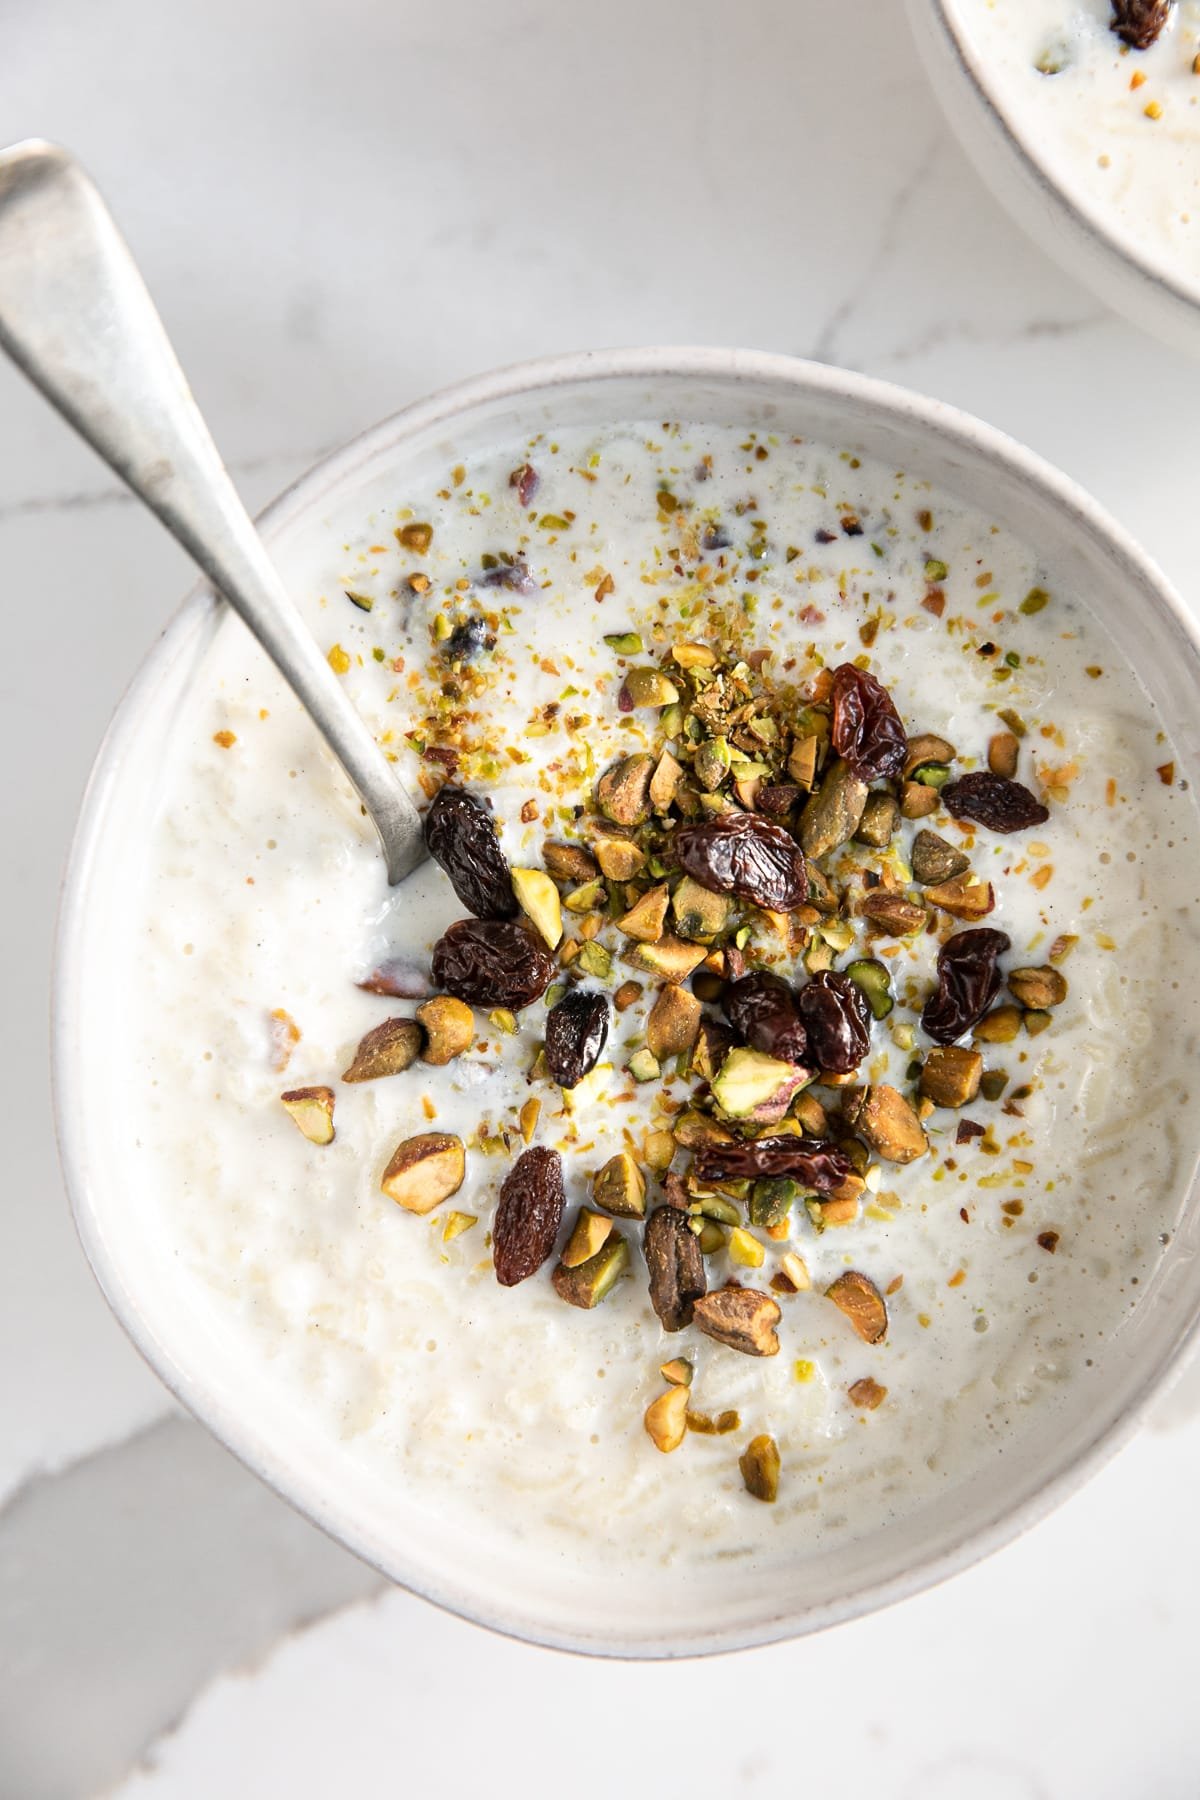 Kheer Recipe (Indian Rice Pudding) - The Forked Spoon